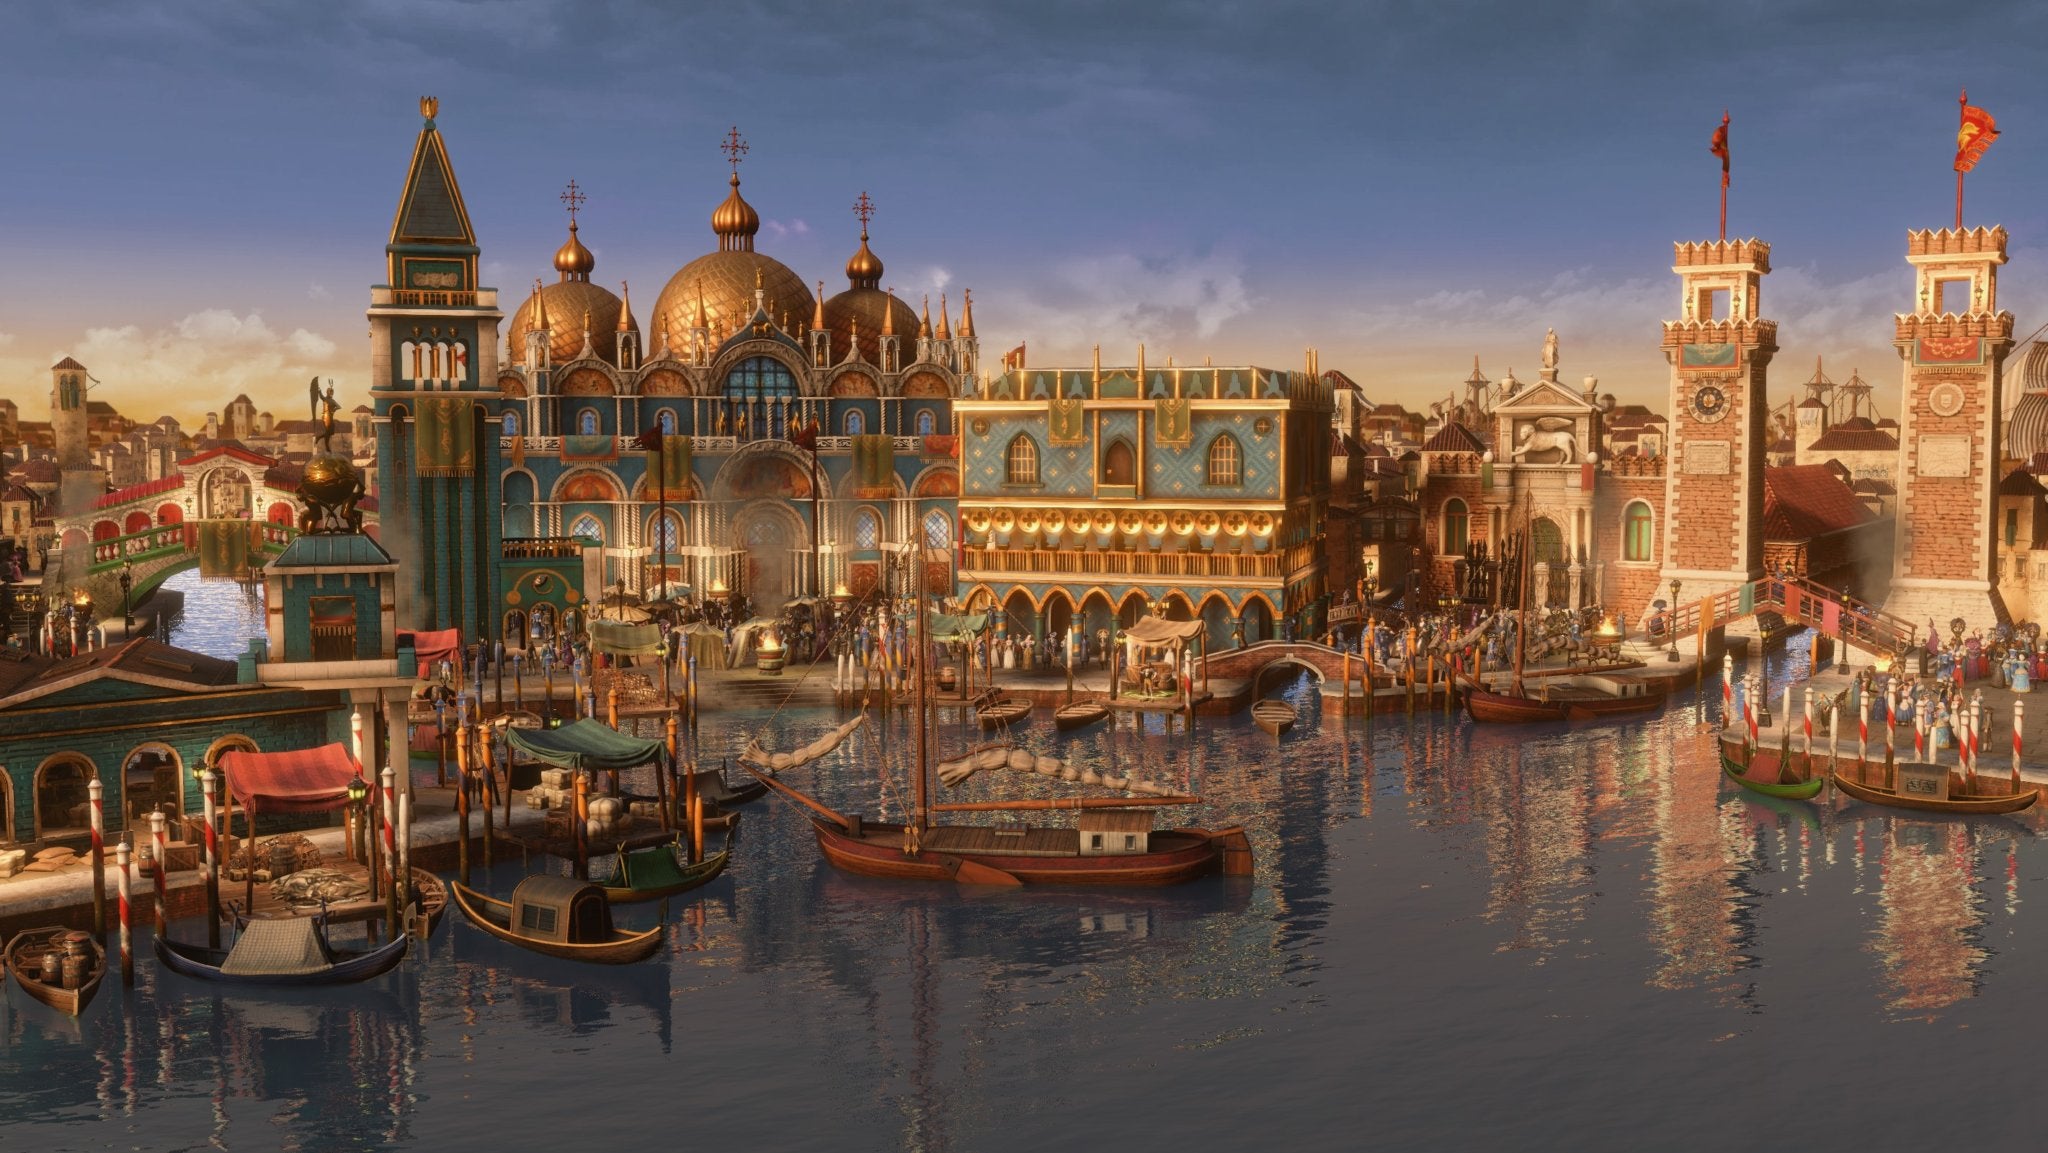 Image for Age of Empires 3: Definitive Edition's Knights of the Mediterranean DLC gets a release date